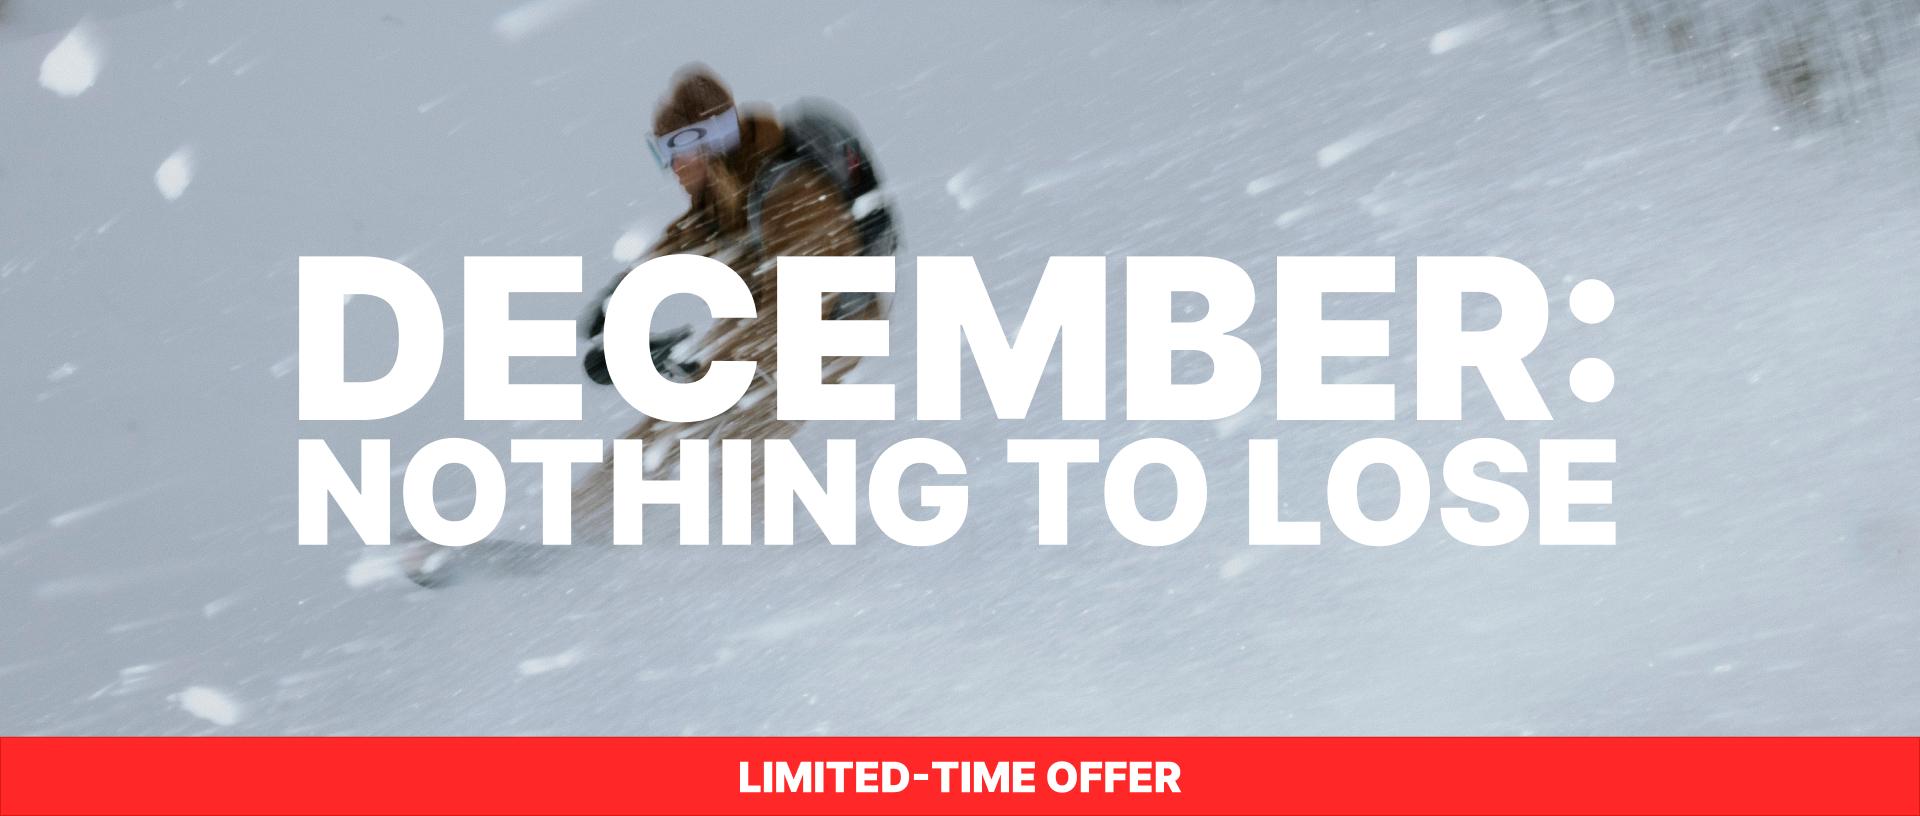 December: Nothing to lose - Limited-time offer